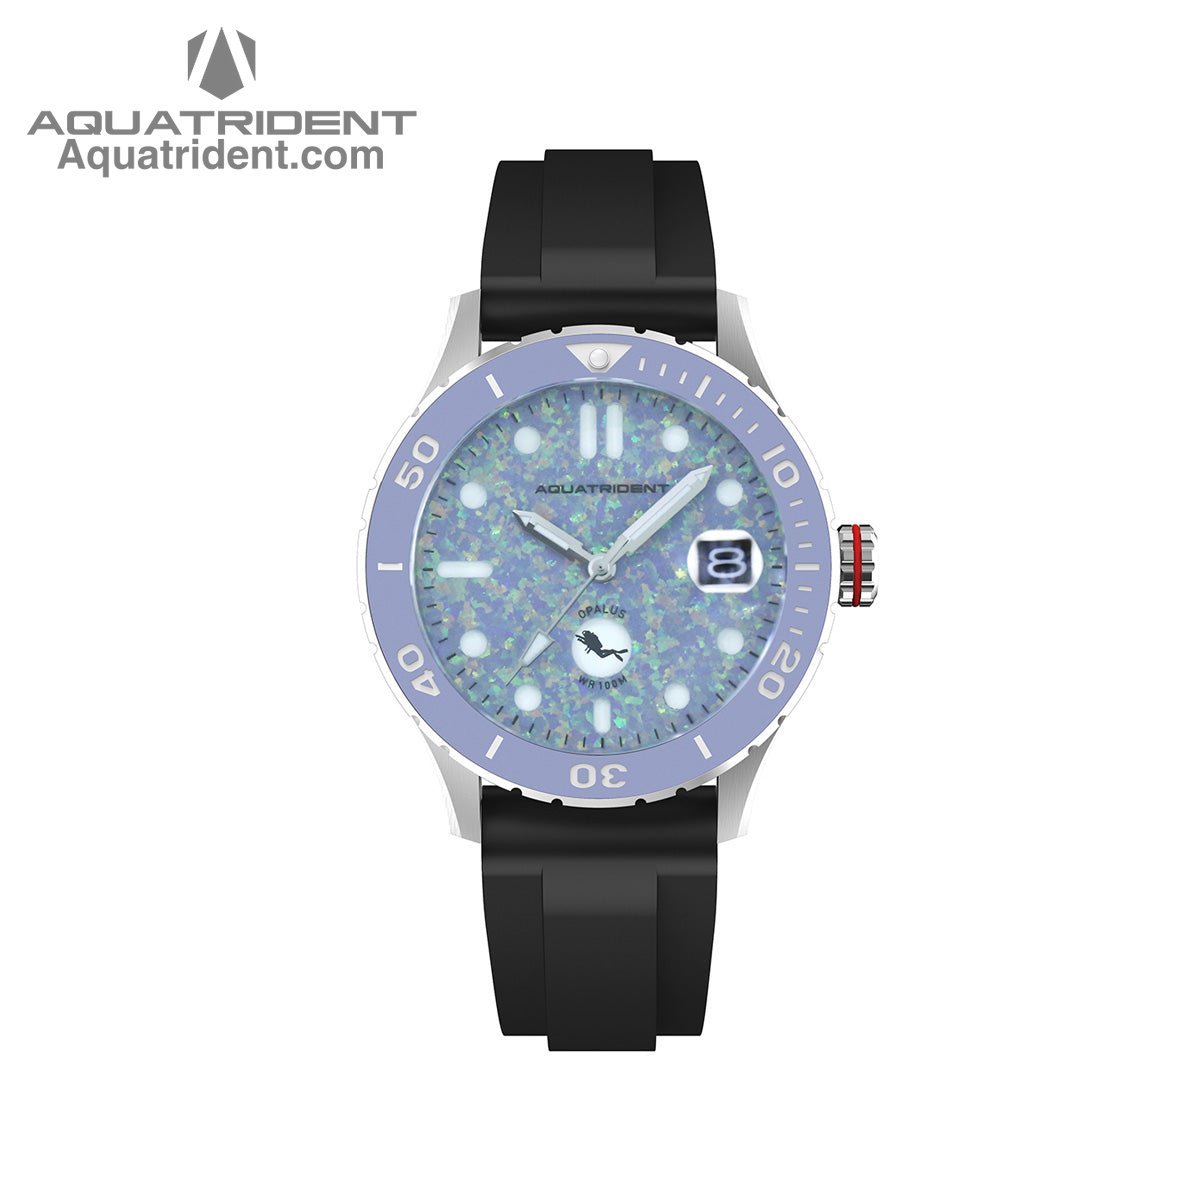 Aquatrident's Ocean Automatic Watch with Ceramic，Rotating, 120 clicks Bezel and coral blue opal Dial front view